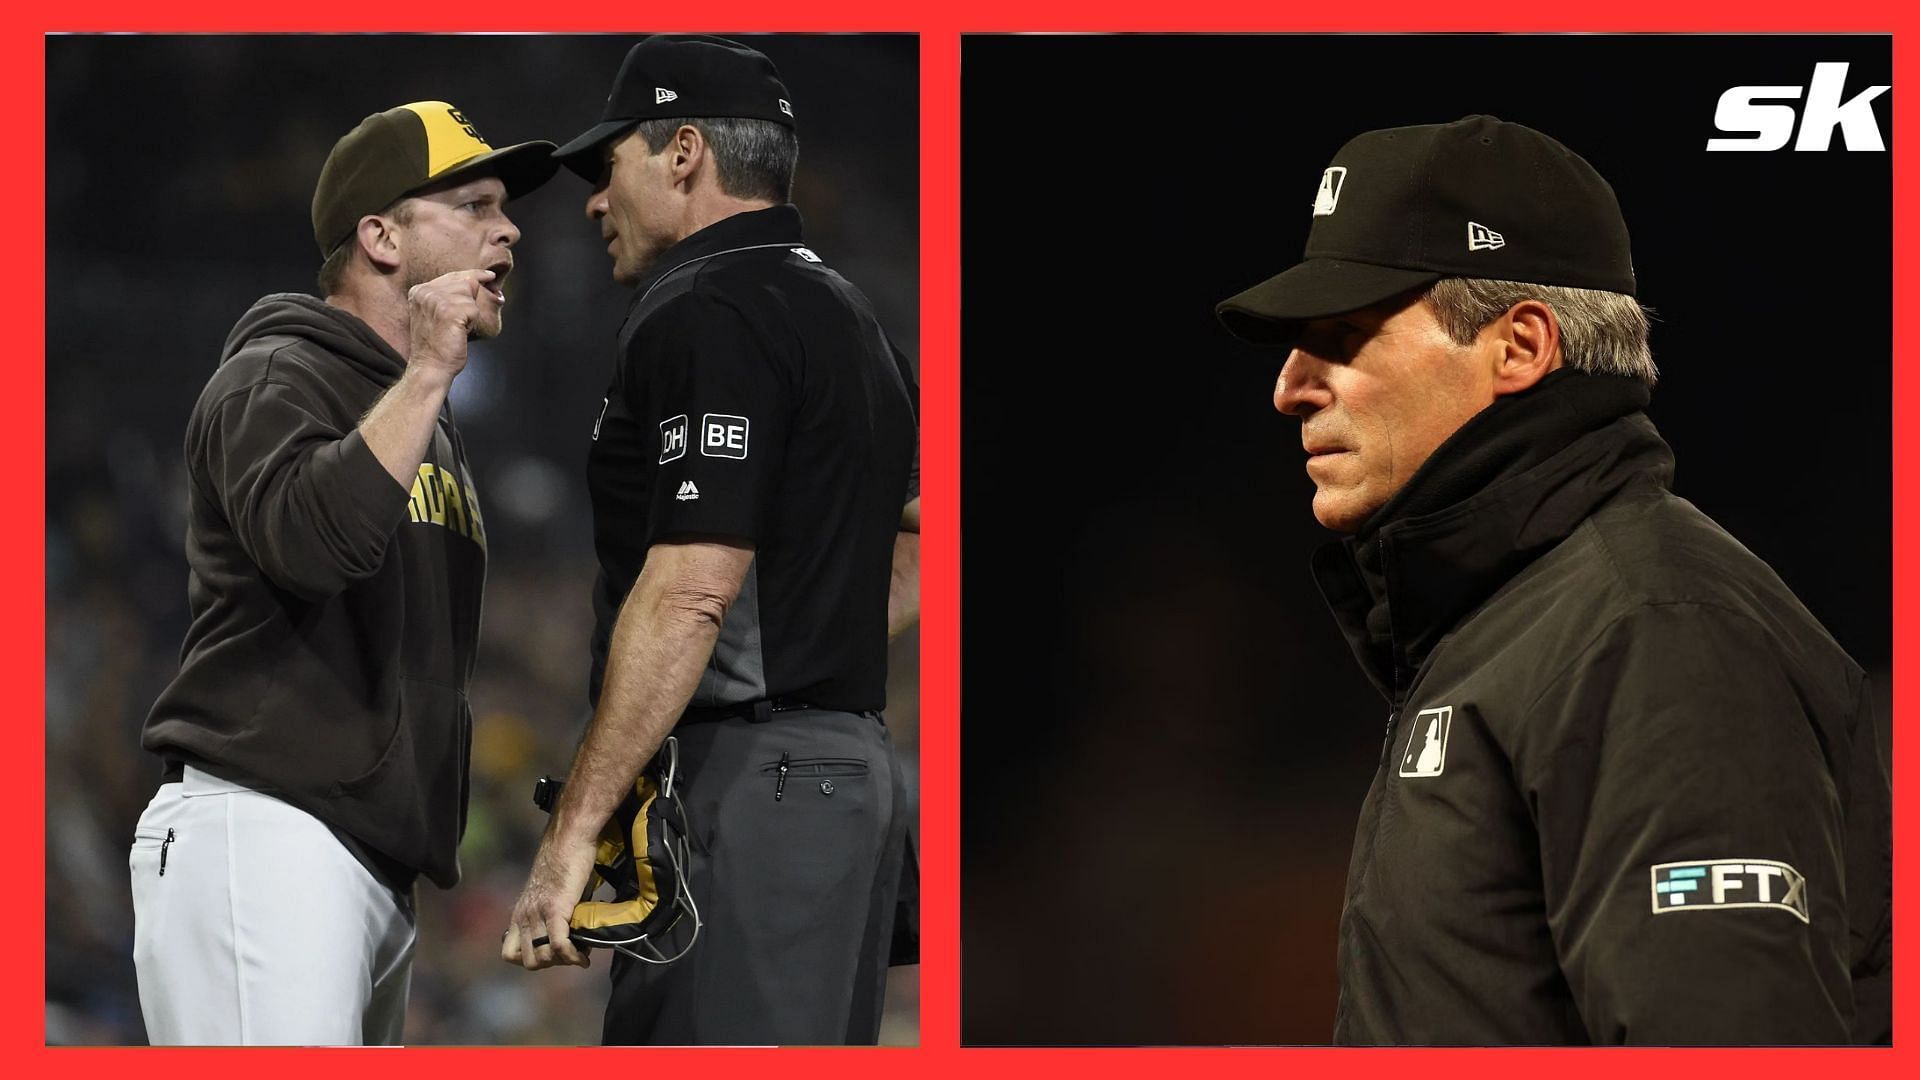 MLB Twitter fans express disappointment as umpire Angel Fernandez remains elusively absent from baseball scene